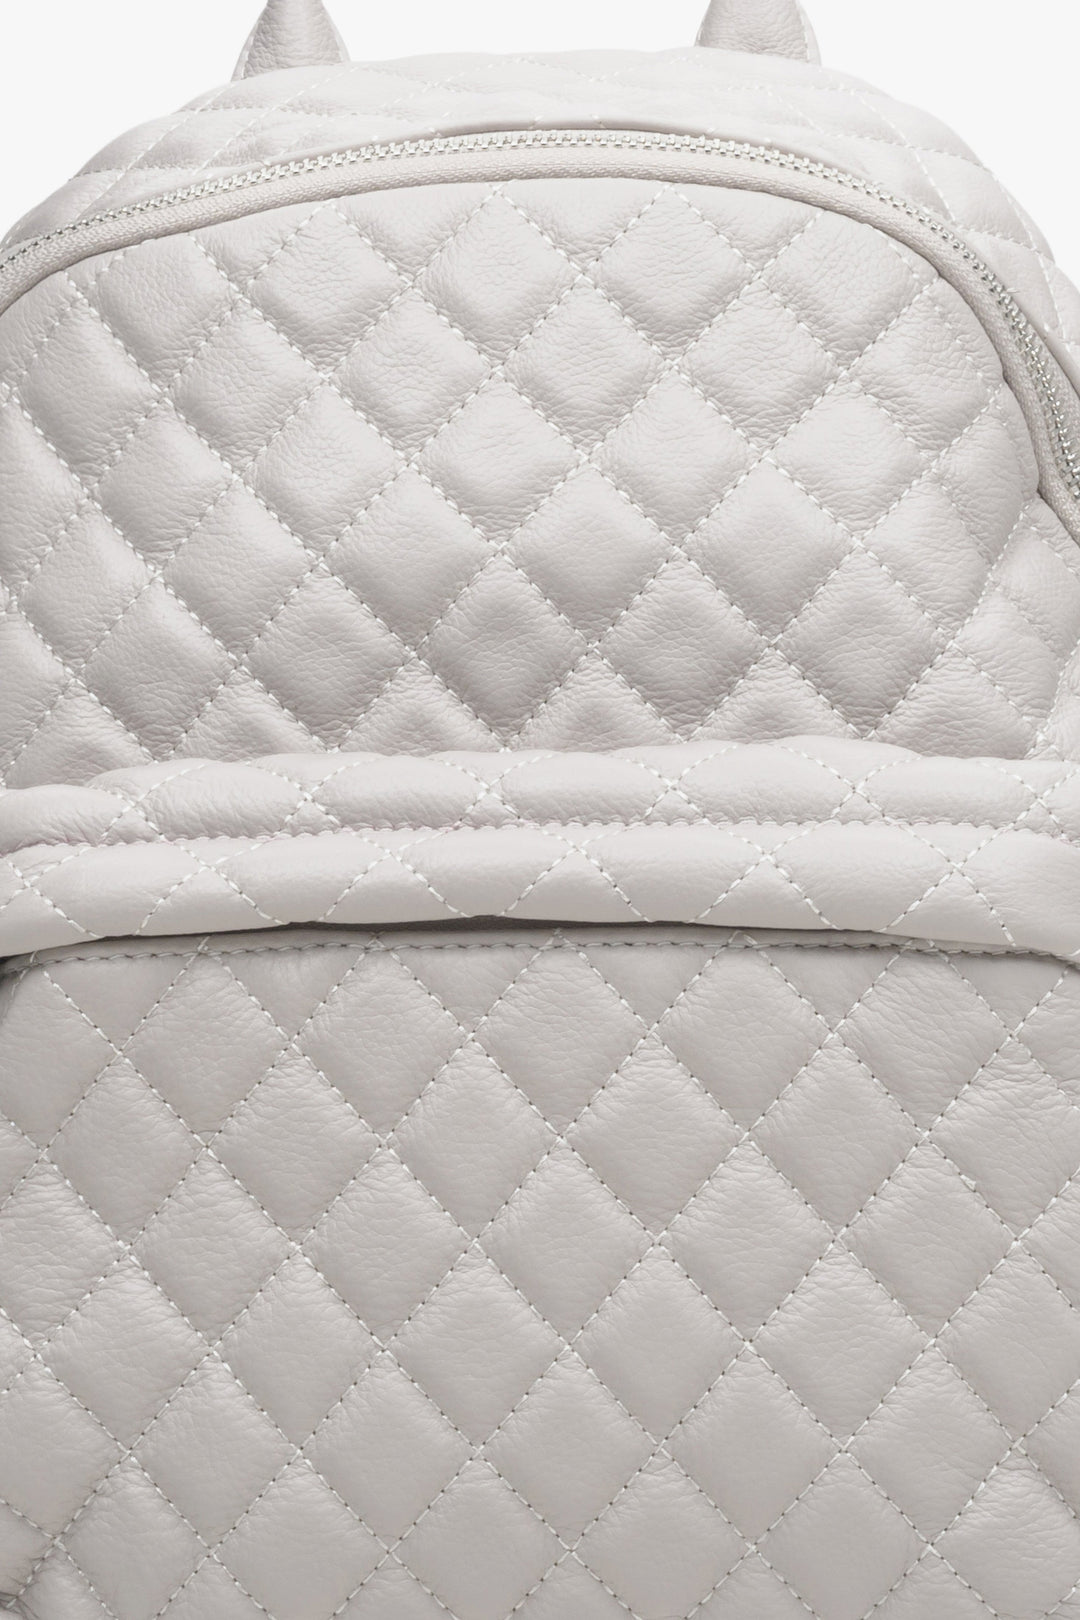 Women's light beige leather backpack by Estro - close-up of the stitching detail.